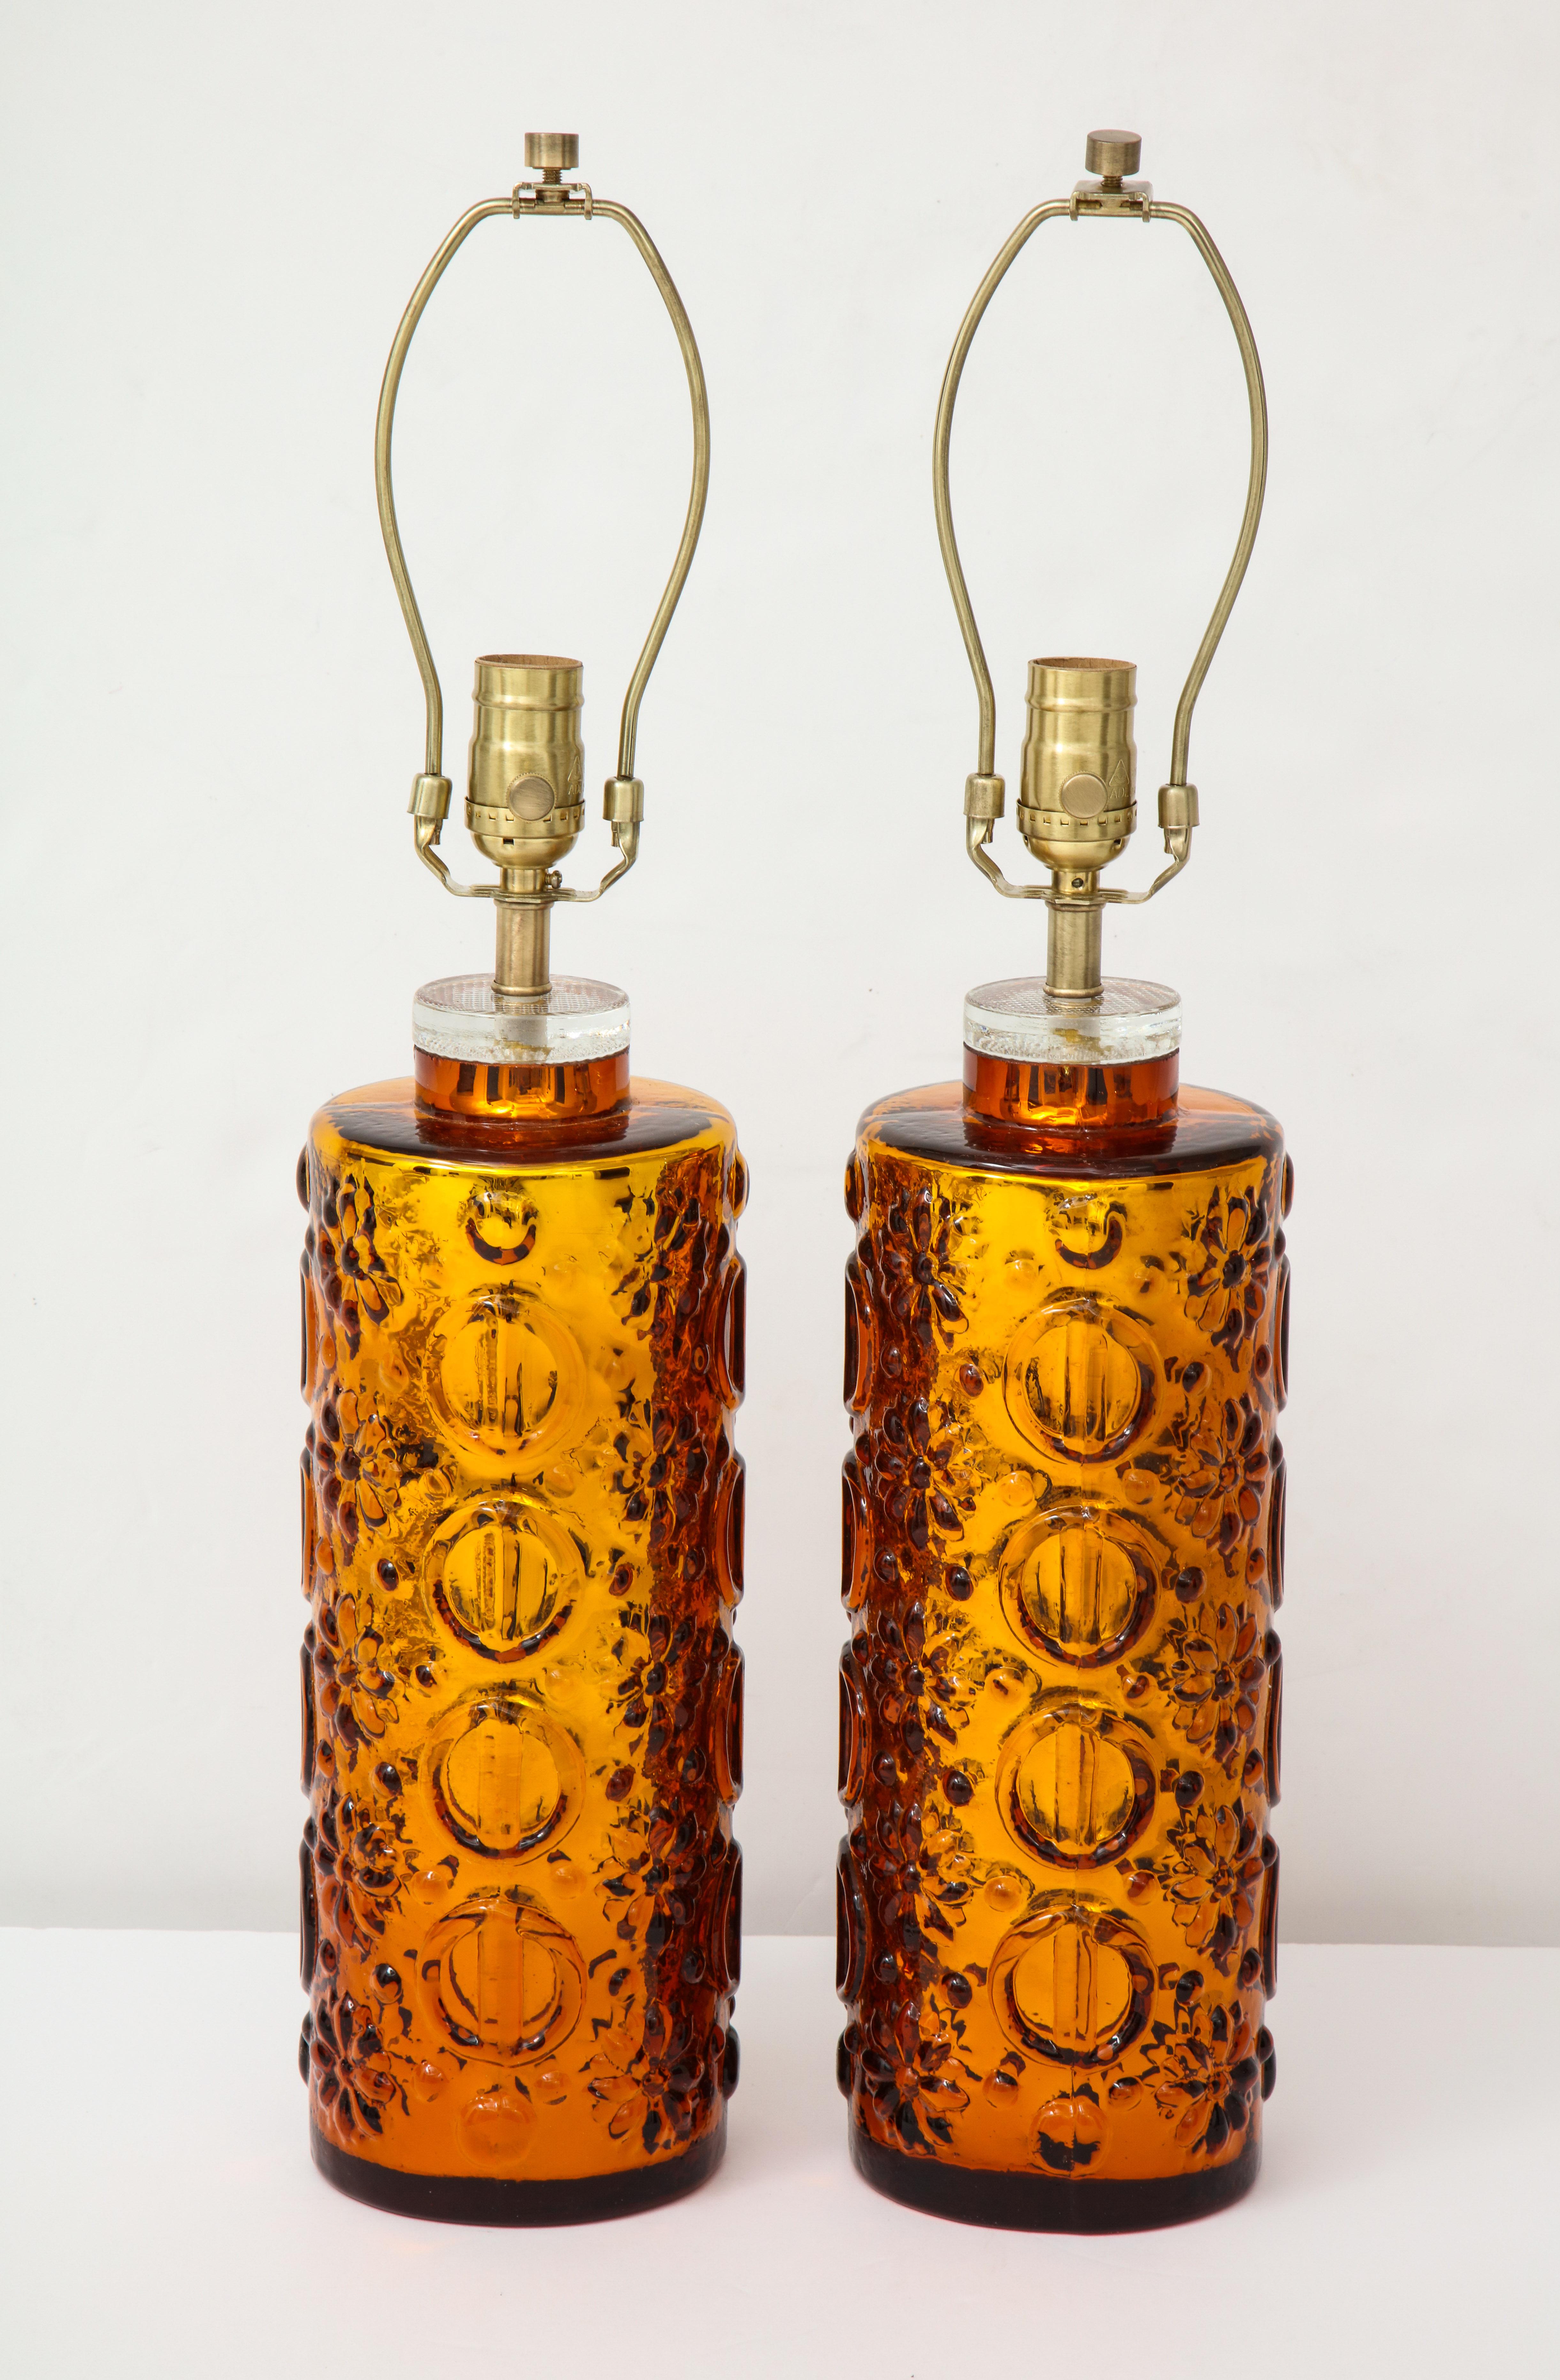 Pair of Scandinavian Modern heavy molded glass lamps with a gold mercury glass interior finish, and graphic patterned clear glass overlay. Rewired for use in the USA. 100W max bulbs.